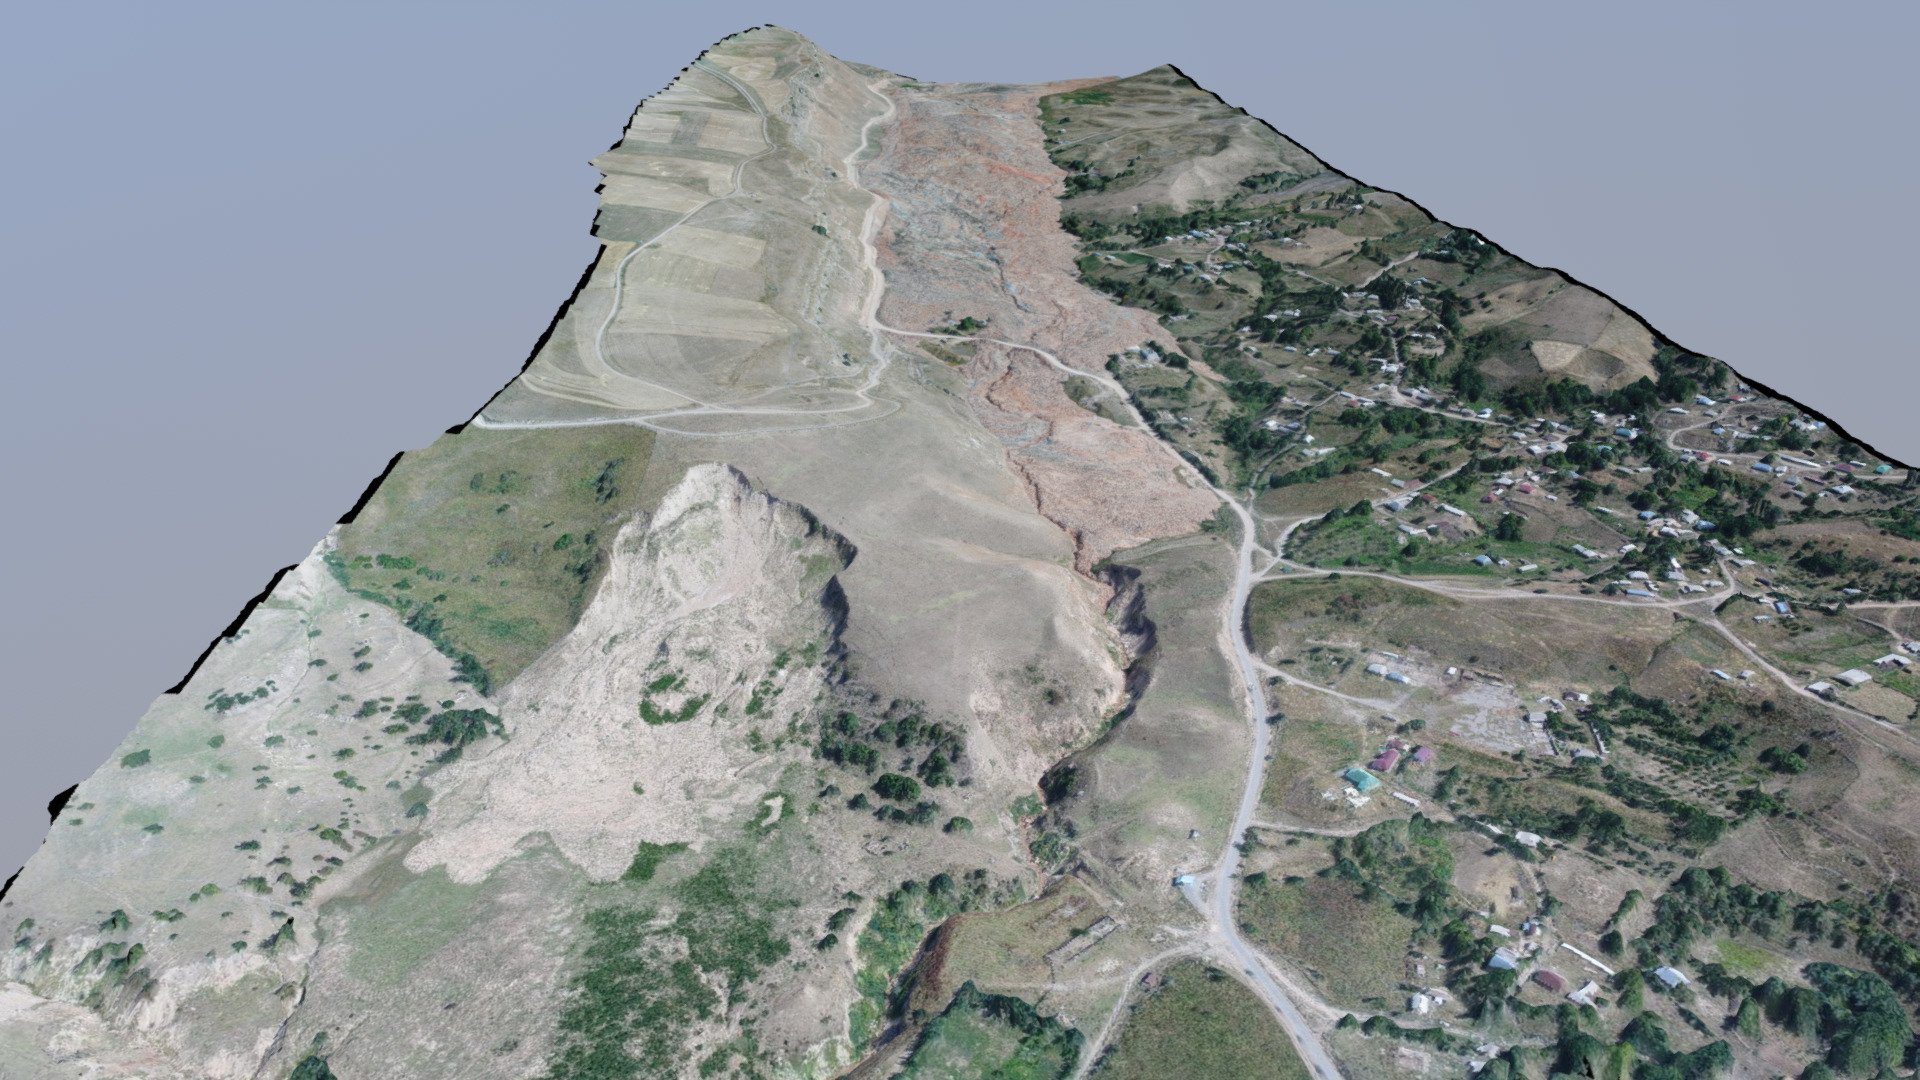 Landslides 3D models using DJI phantom 3/4 pro during two fieldcampaigns in 2016 and 2017 in Kyrgyzstan, Central Asia.
contact: behling@gfz-potsdam.de
https://www.gfz-potsdam.de/en/staff/robert-behling/sec14/ - KurbuTash_LowePart_Toe - 3D model by sec14gfz 3d model